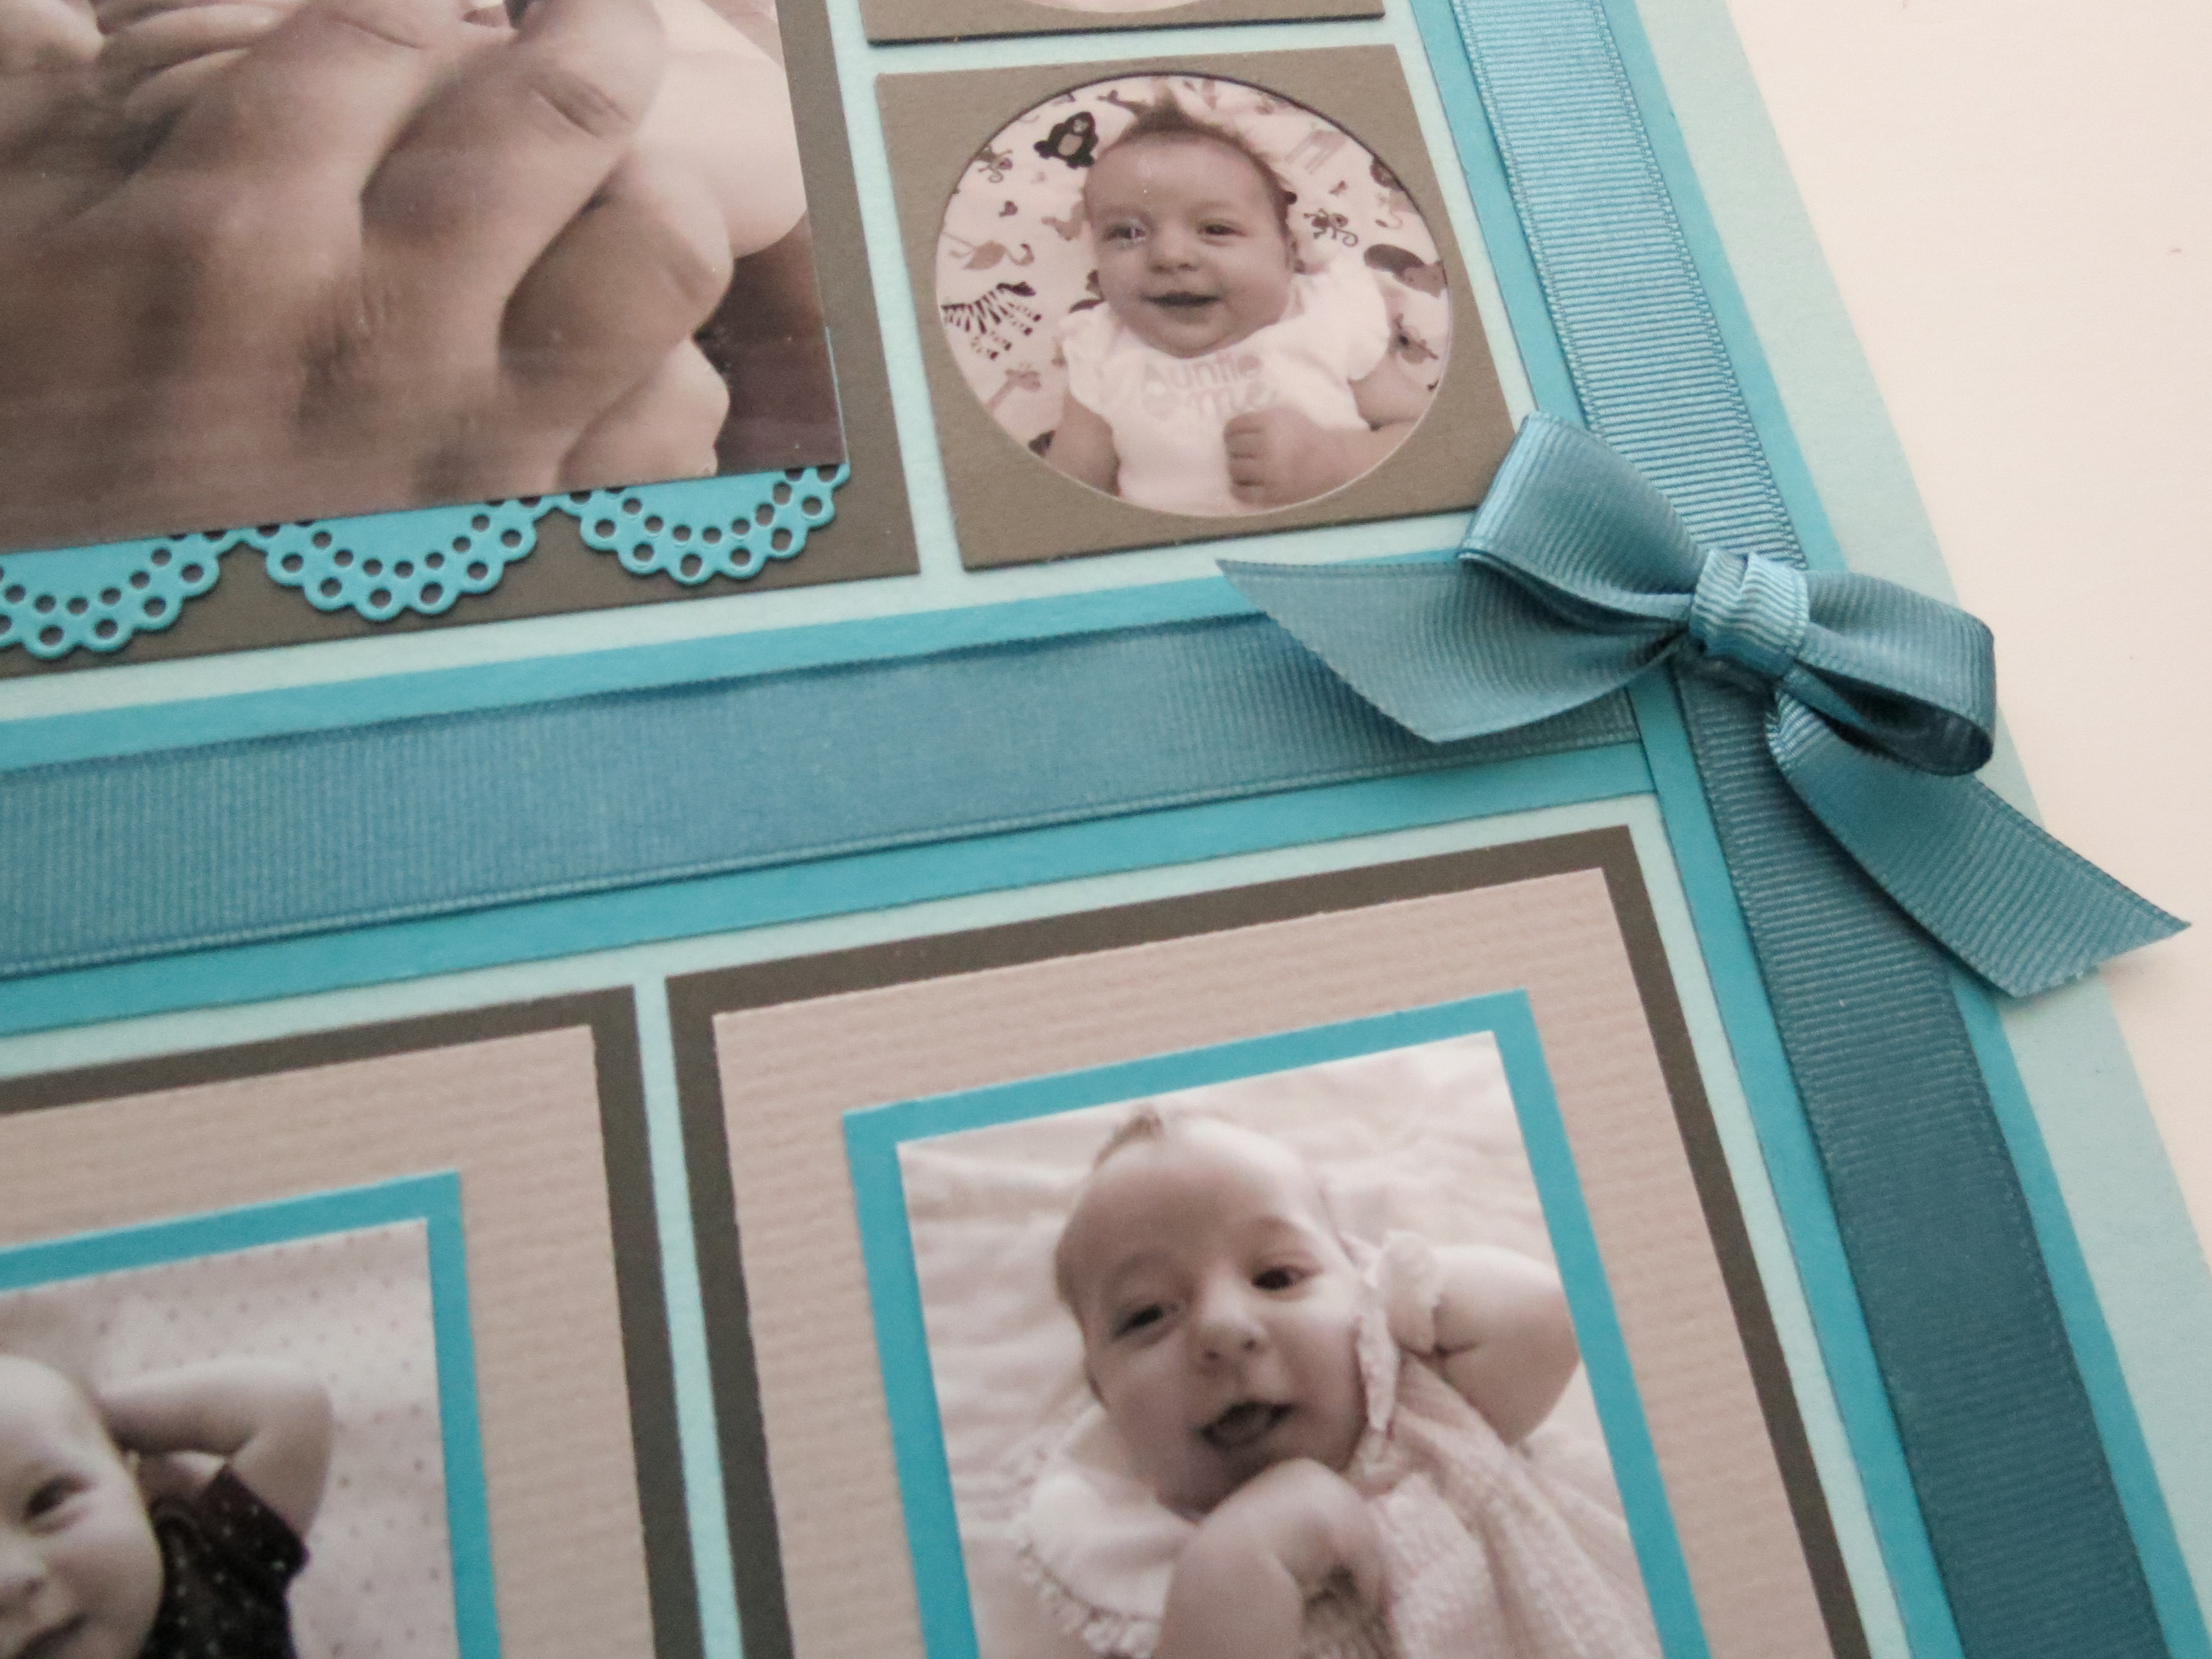 How to create a color palette for your scrapbook — Make Sweet Memories